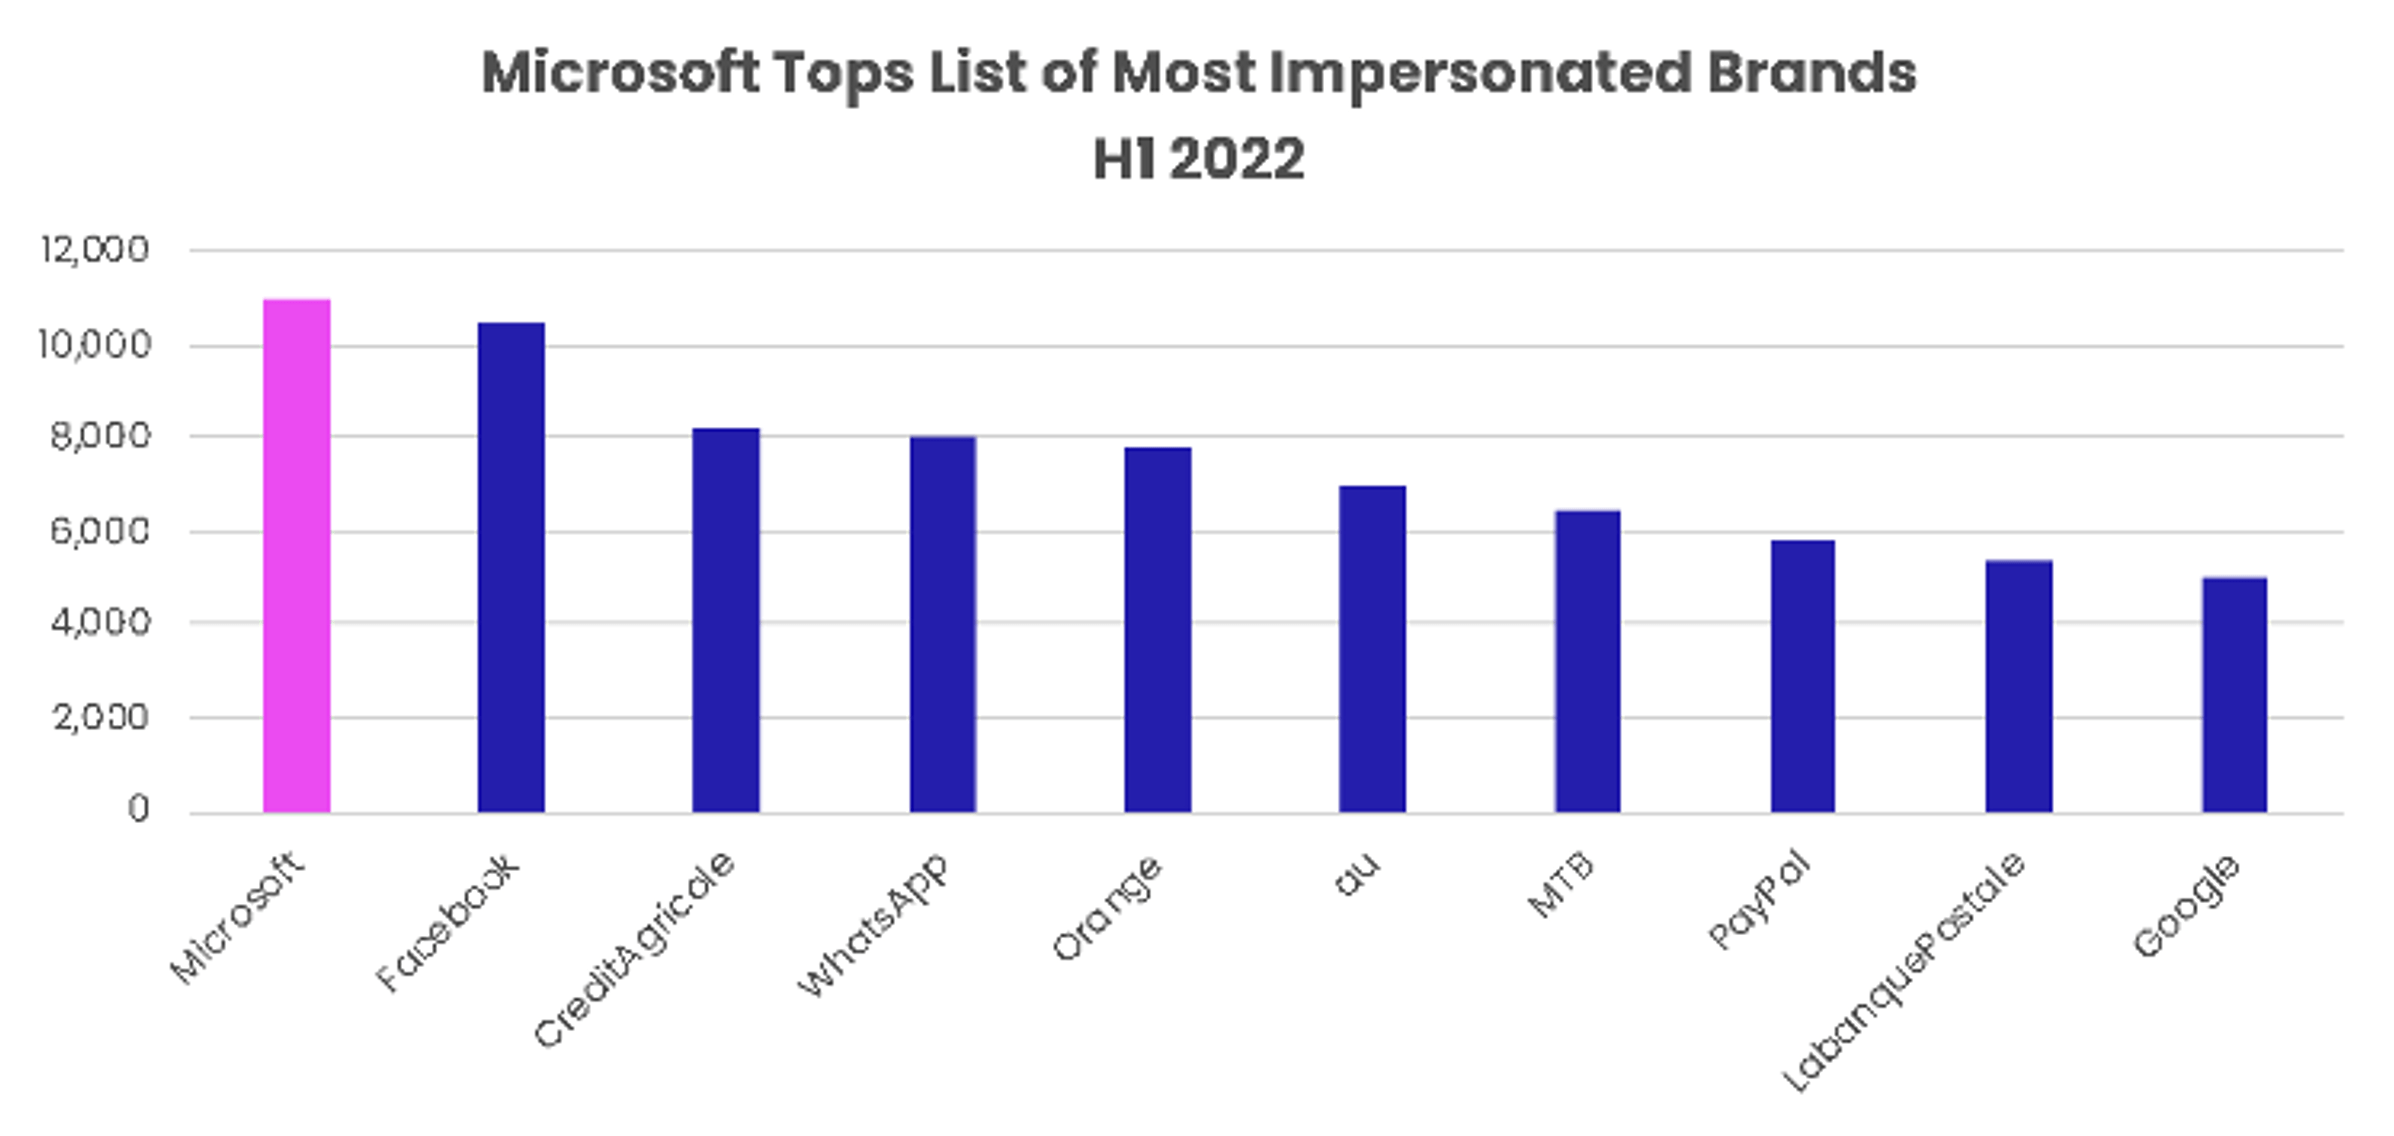 Email security - Microsoft as the most impersonated brand